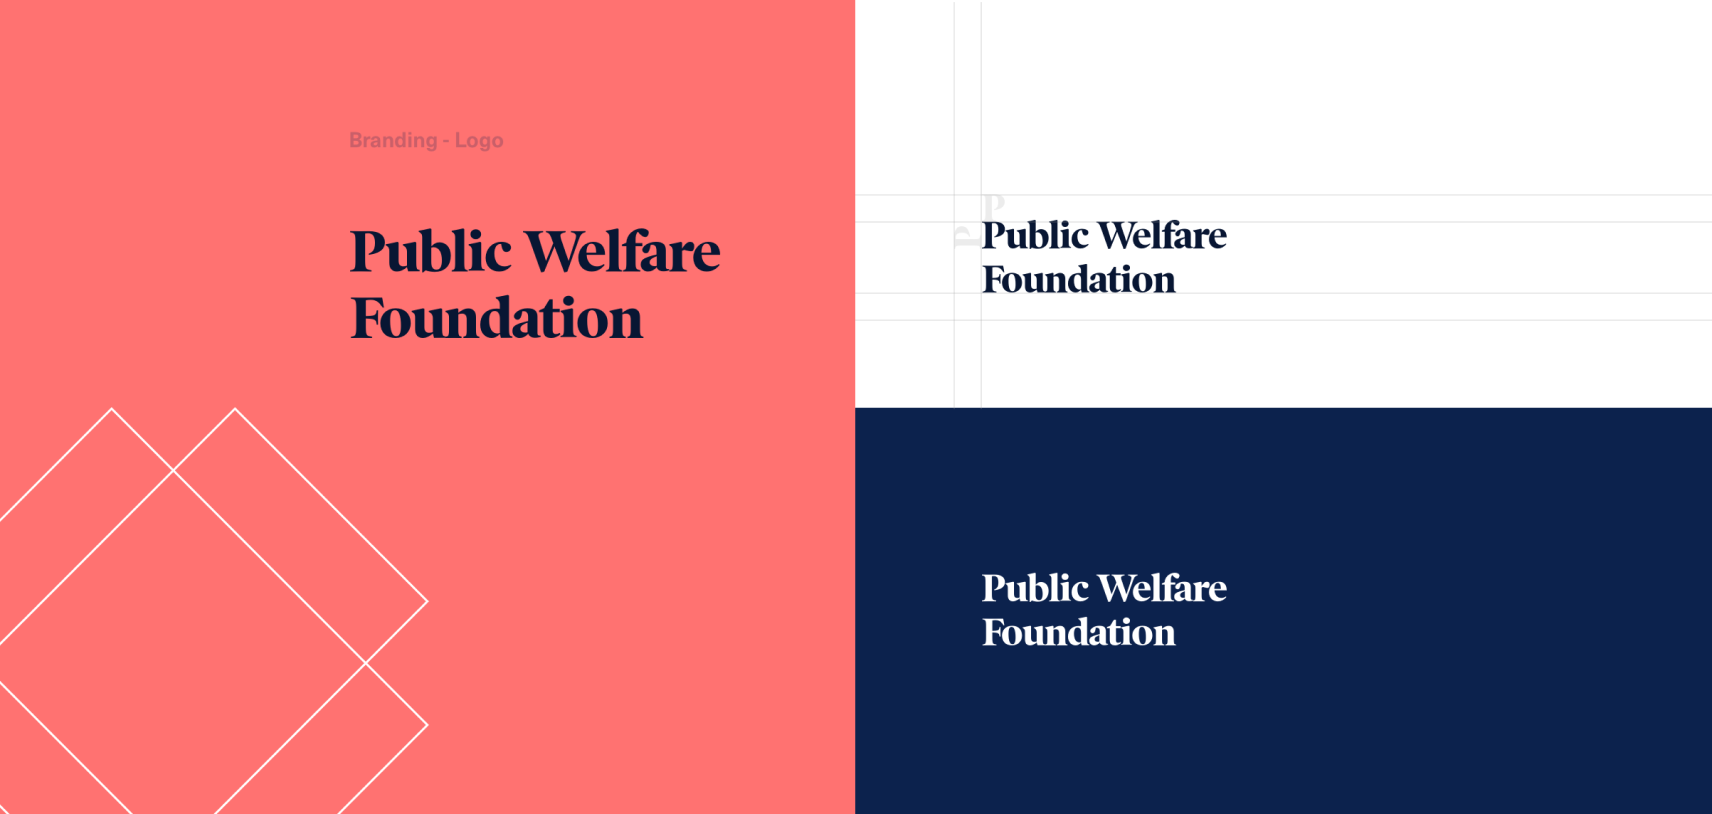 Grid of logos showing Public Welfare Foundation branding in a variety of colors.